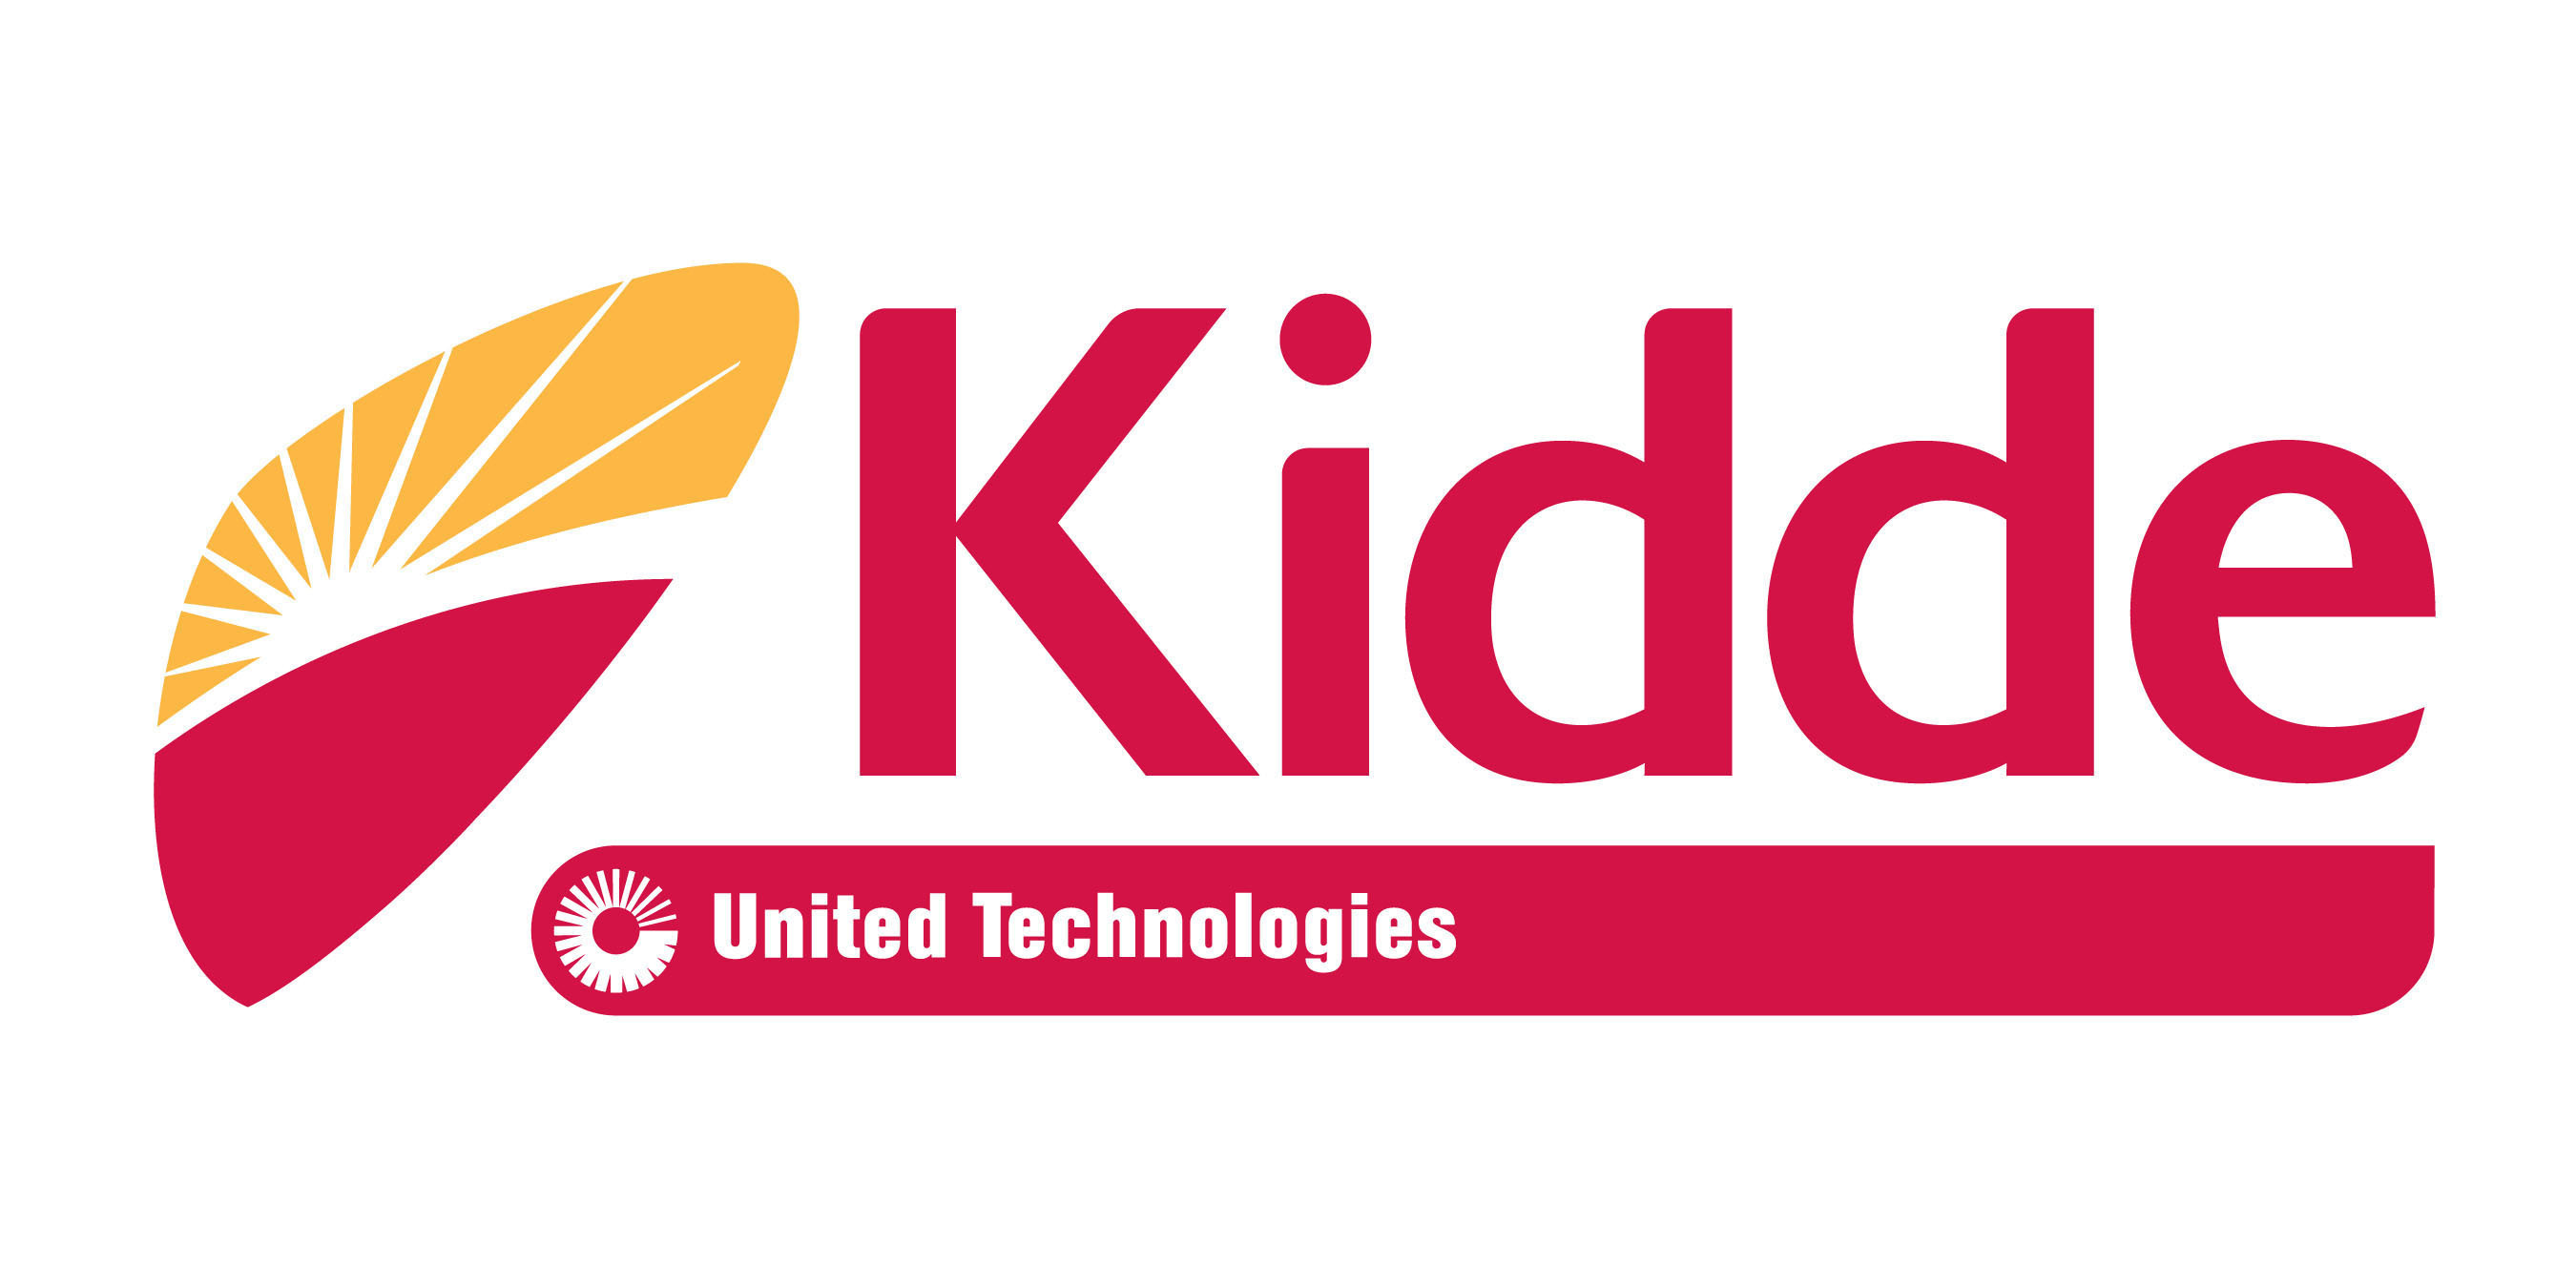 As the world's largest manufacturer of residential fire safety products, Kidde's mission is to provide solutions that protect people and property from the effects of fire and its related hazards. For more than 90 years, Kidde has used advanced technology to develop residential and commercial smoke alarms, carbon monoxide alarms, fire extinguishers and other life safety products. Kidde: Technology that Saves Lives.